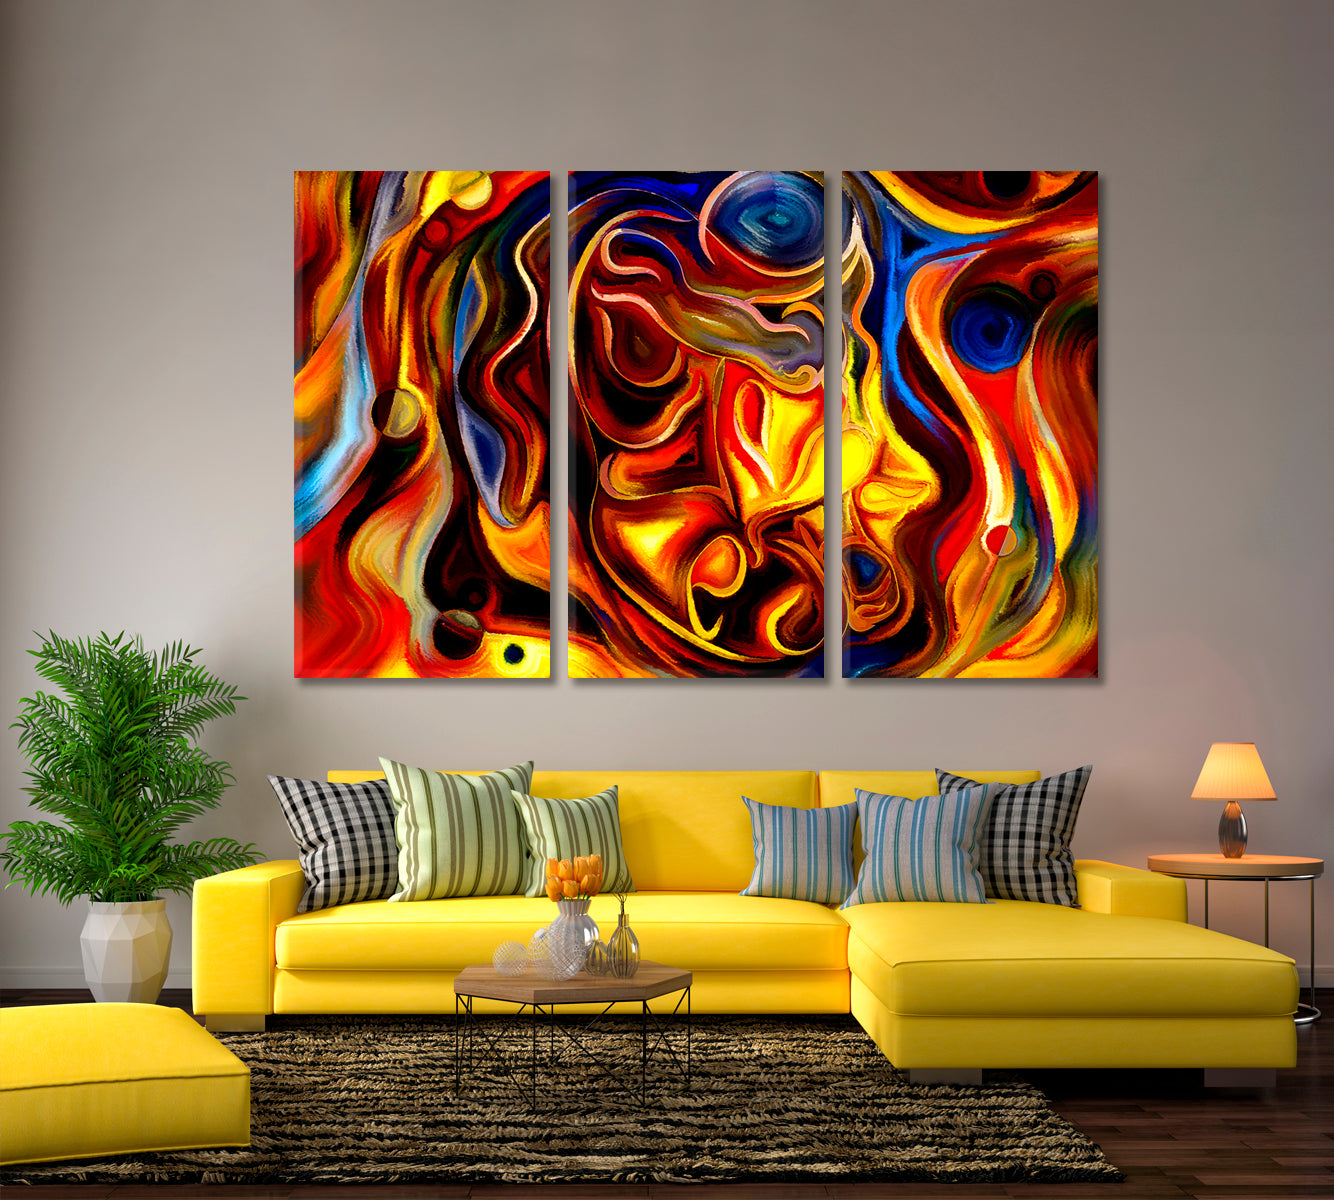 Beyond Forms Abstract Art Print Artesty 3 panels 36" x 24" 